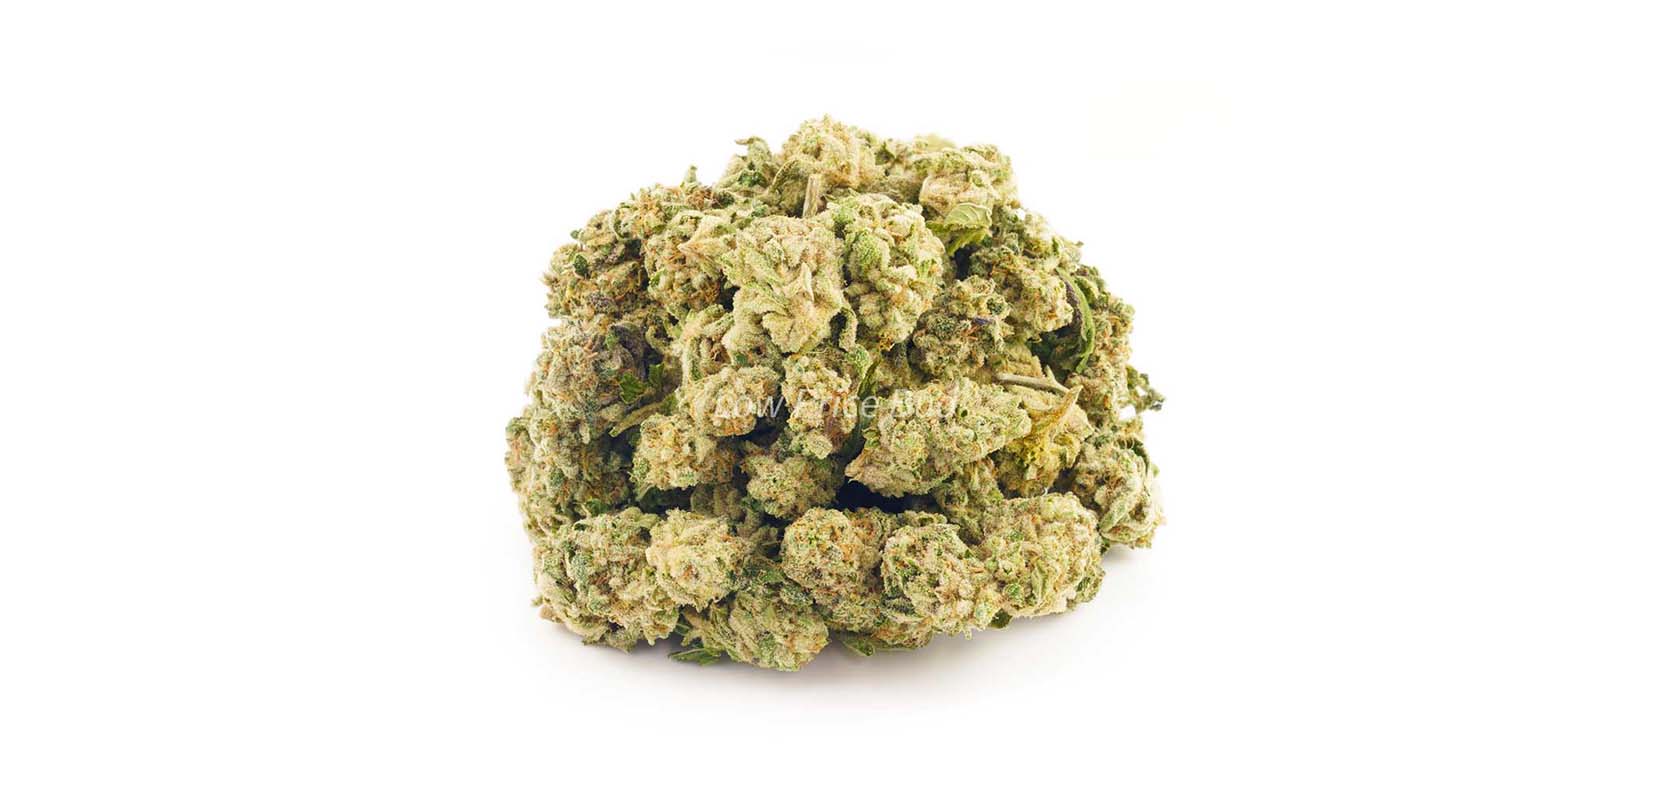 Buy weed Watermelon Zkittlez budget buds at online dispensary Canada to order weed online. BC cannabis. Canadian online dispensary.